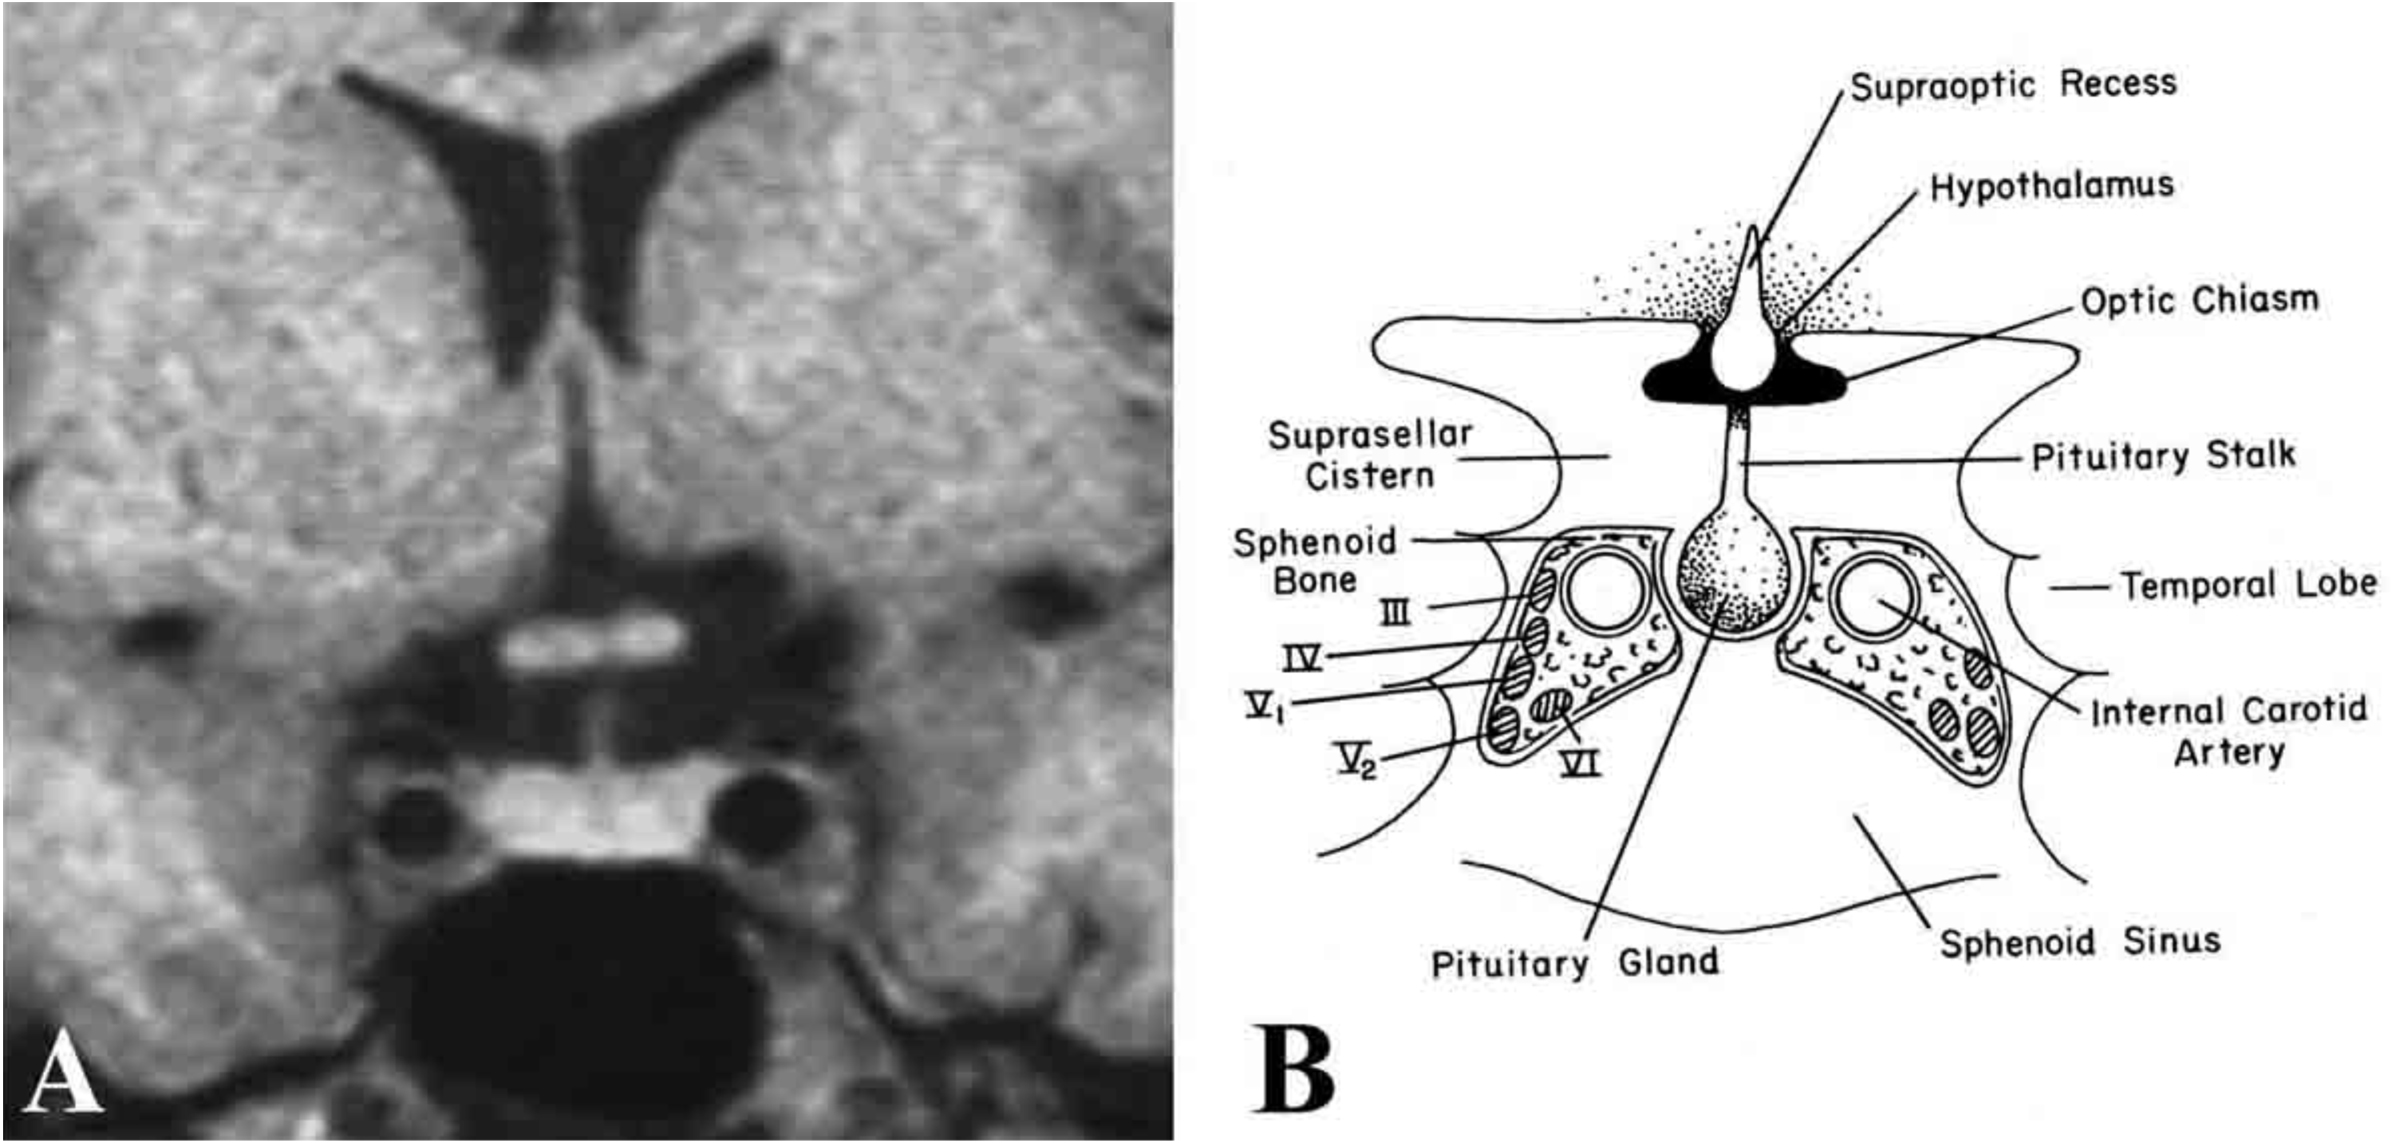 Fig. 7. (A) MRI and (B) schematic image of the pituitary fossa and its anatomic relationships seen in coronal orientation. The cavernous sinus contains the internal carotid artery and cranial nerves III, IV, V1, V2, and VI. The optic chiasm resides immediately above the pituitary gland and is separated from it by a cerebrospinal fluid-filled cistern. (Modified from Lechan RM. Neuroendocrinology of Pituitary Hormone